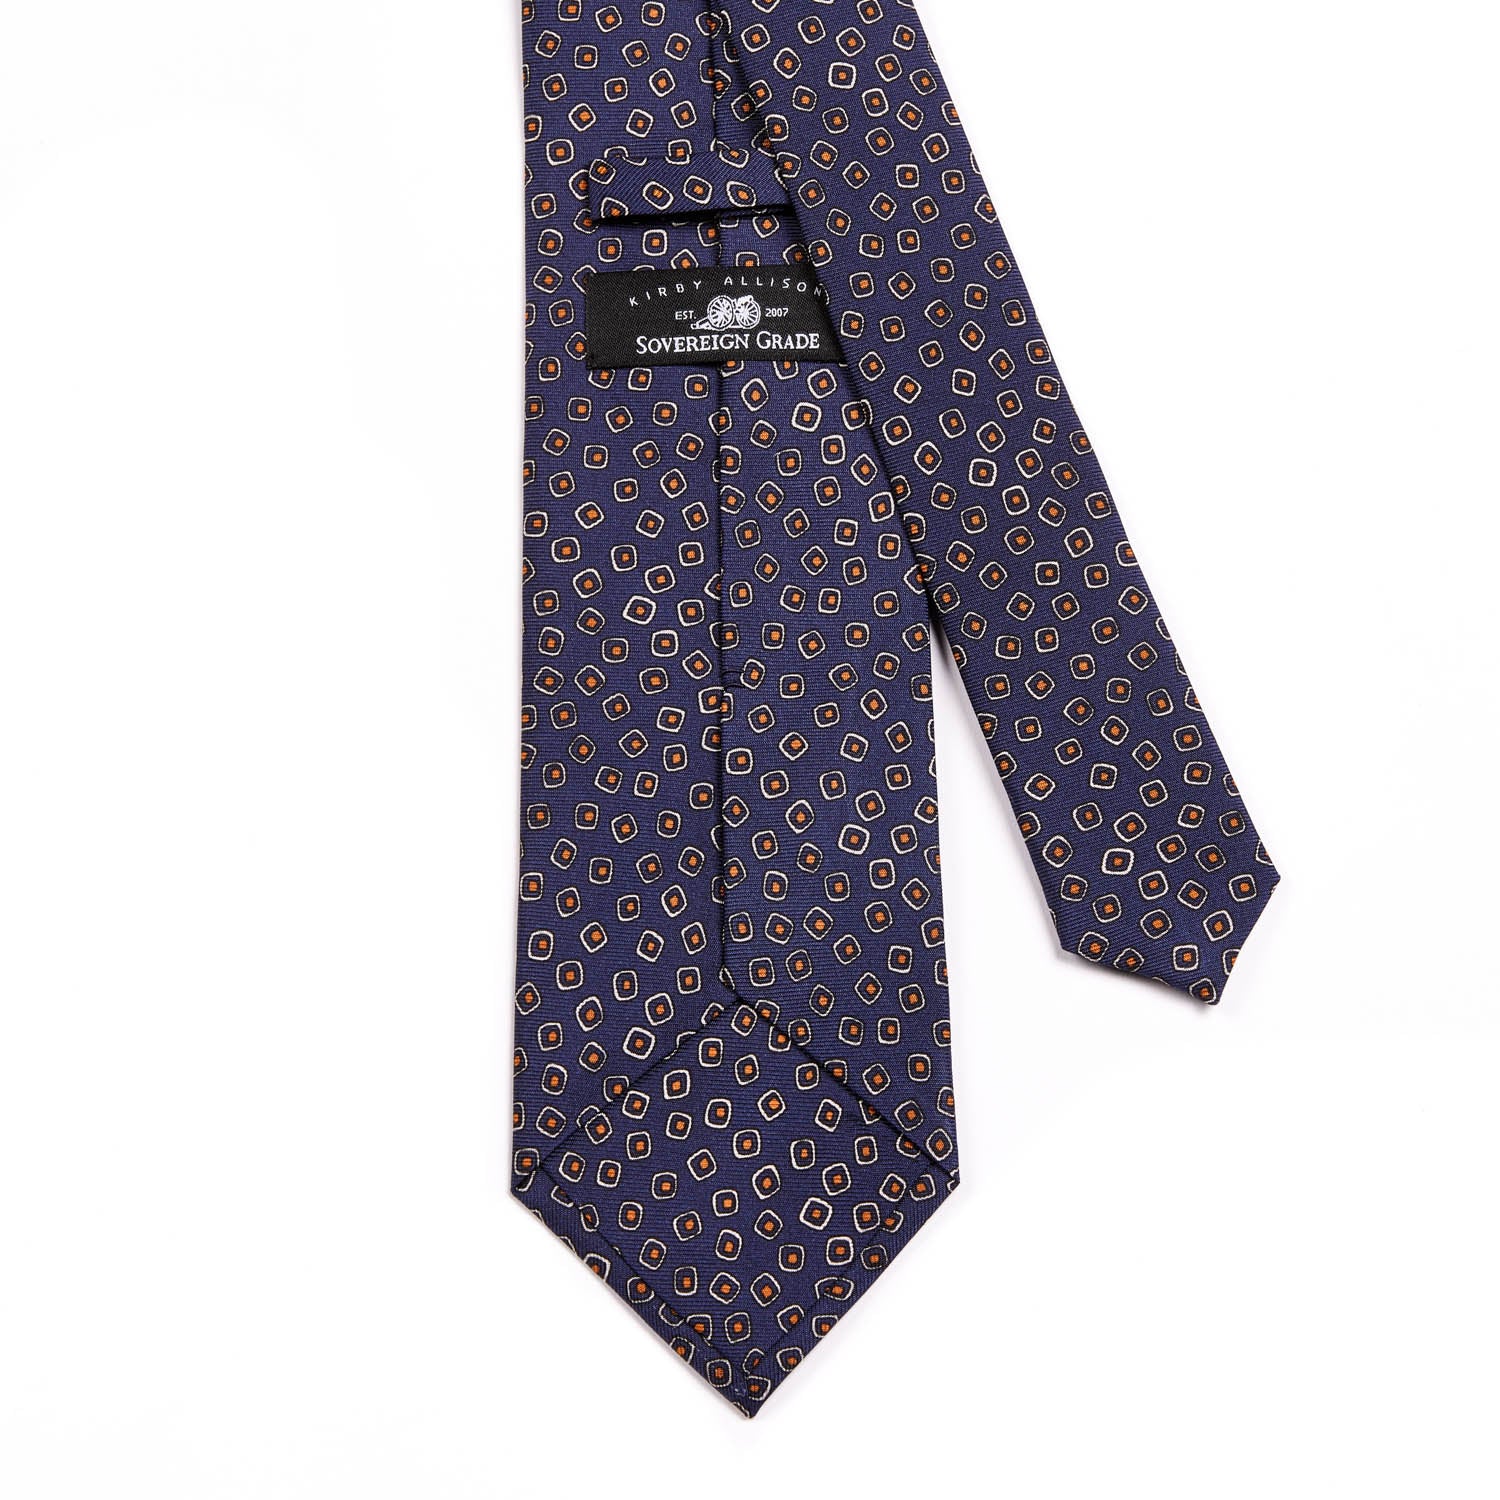 A Sovereign Grade Navy/White Eton Printed Silk Tie, 150cm made of 100% English silk with a pattern, handmade in the United Kingdom from KirbyAllison.com.